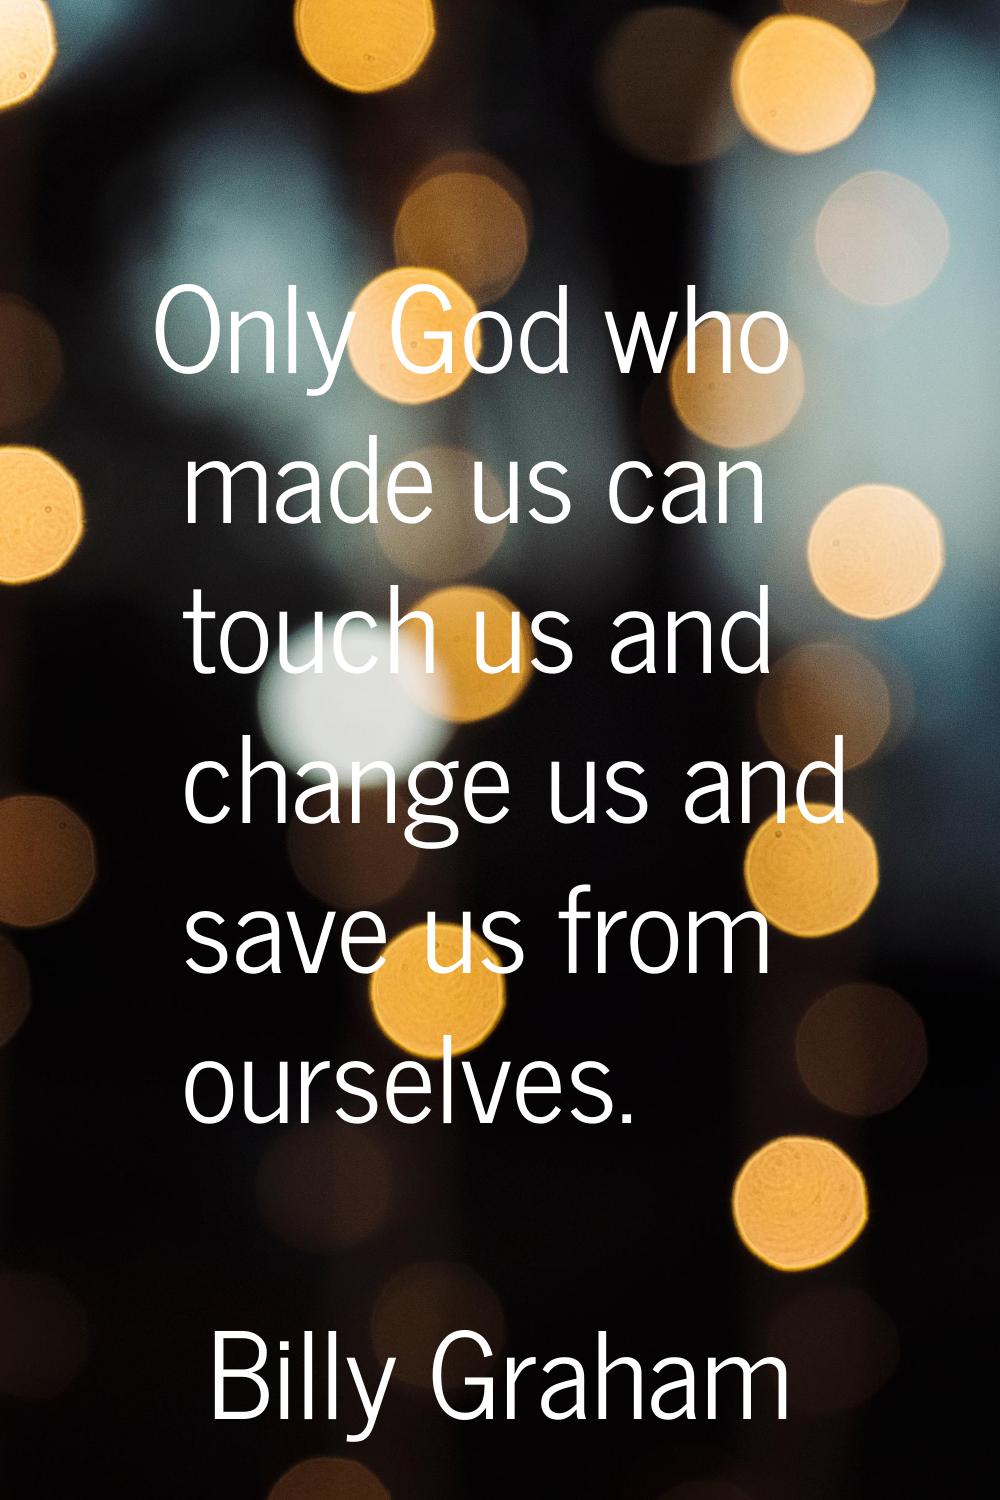 Only God who made us can touch us and change us and save us from ourselves.